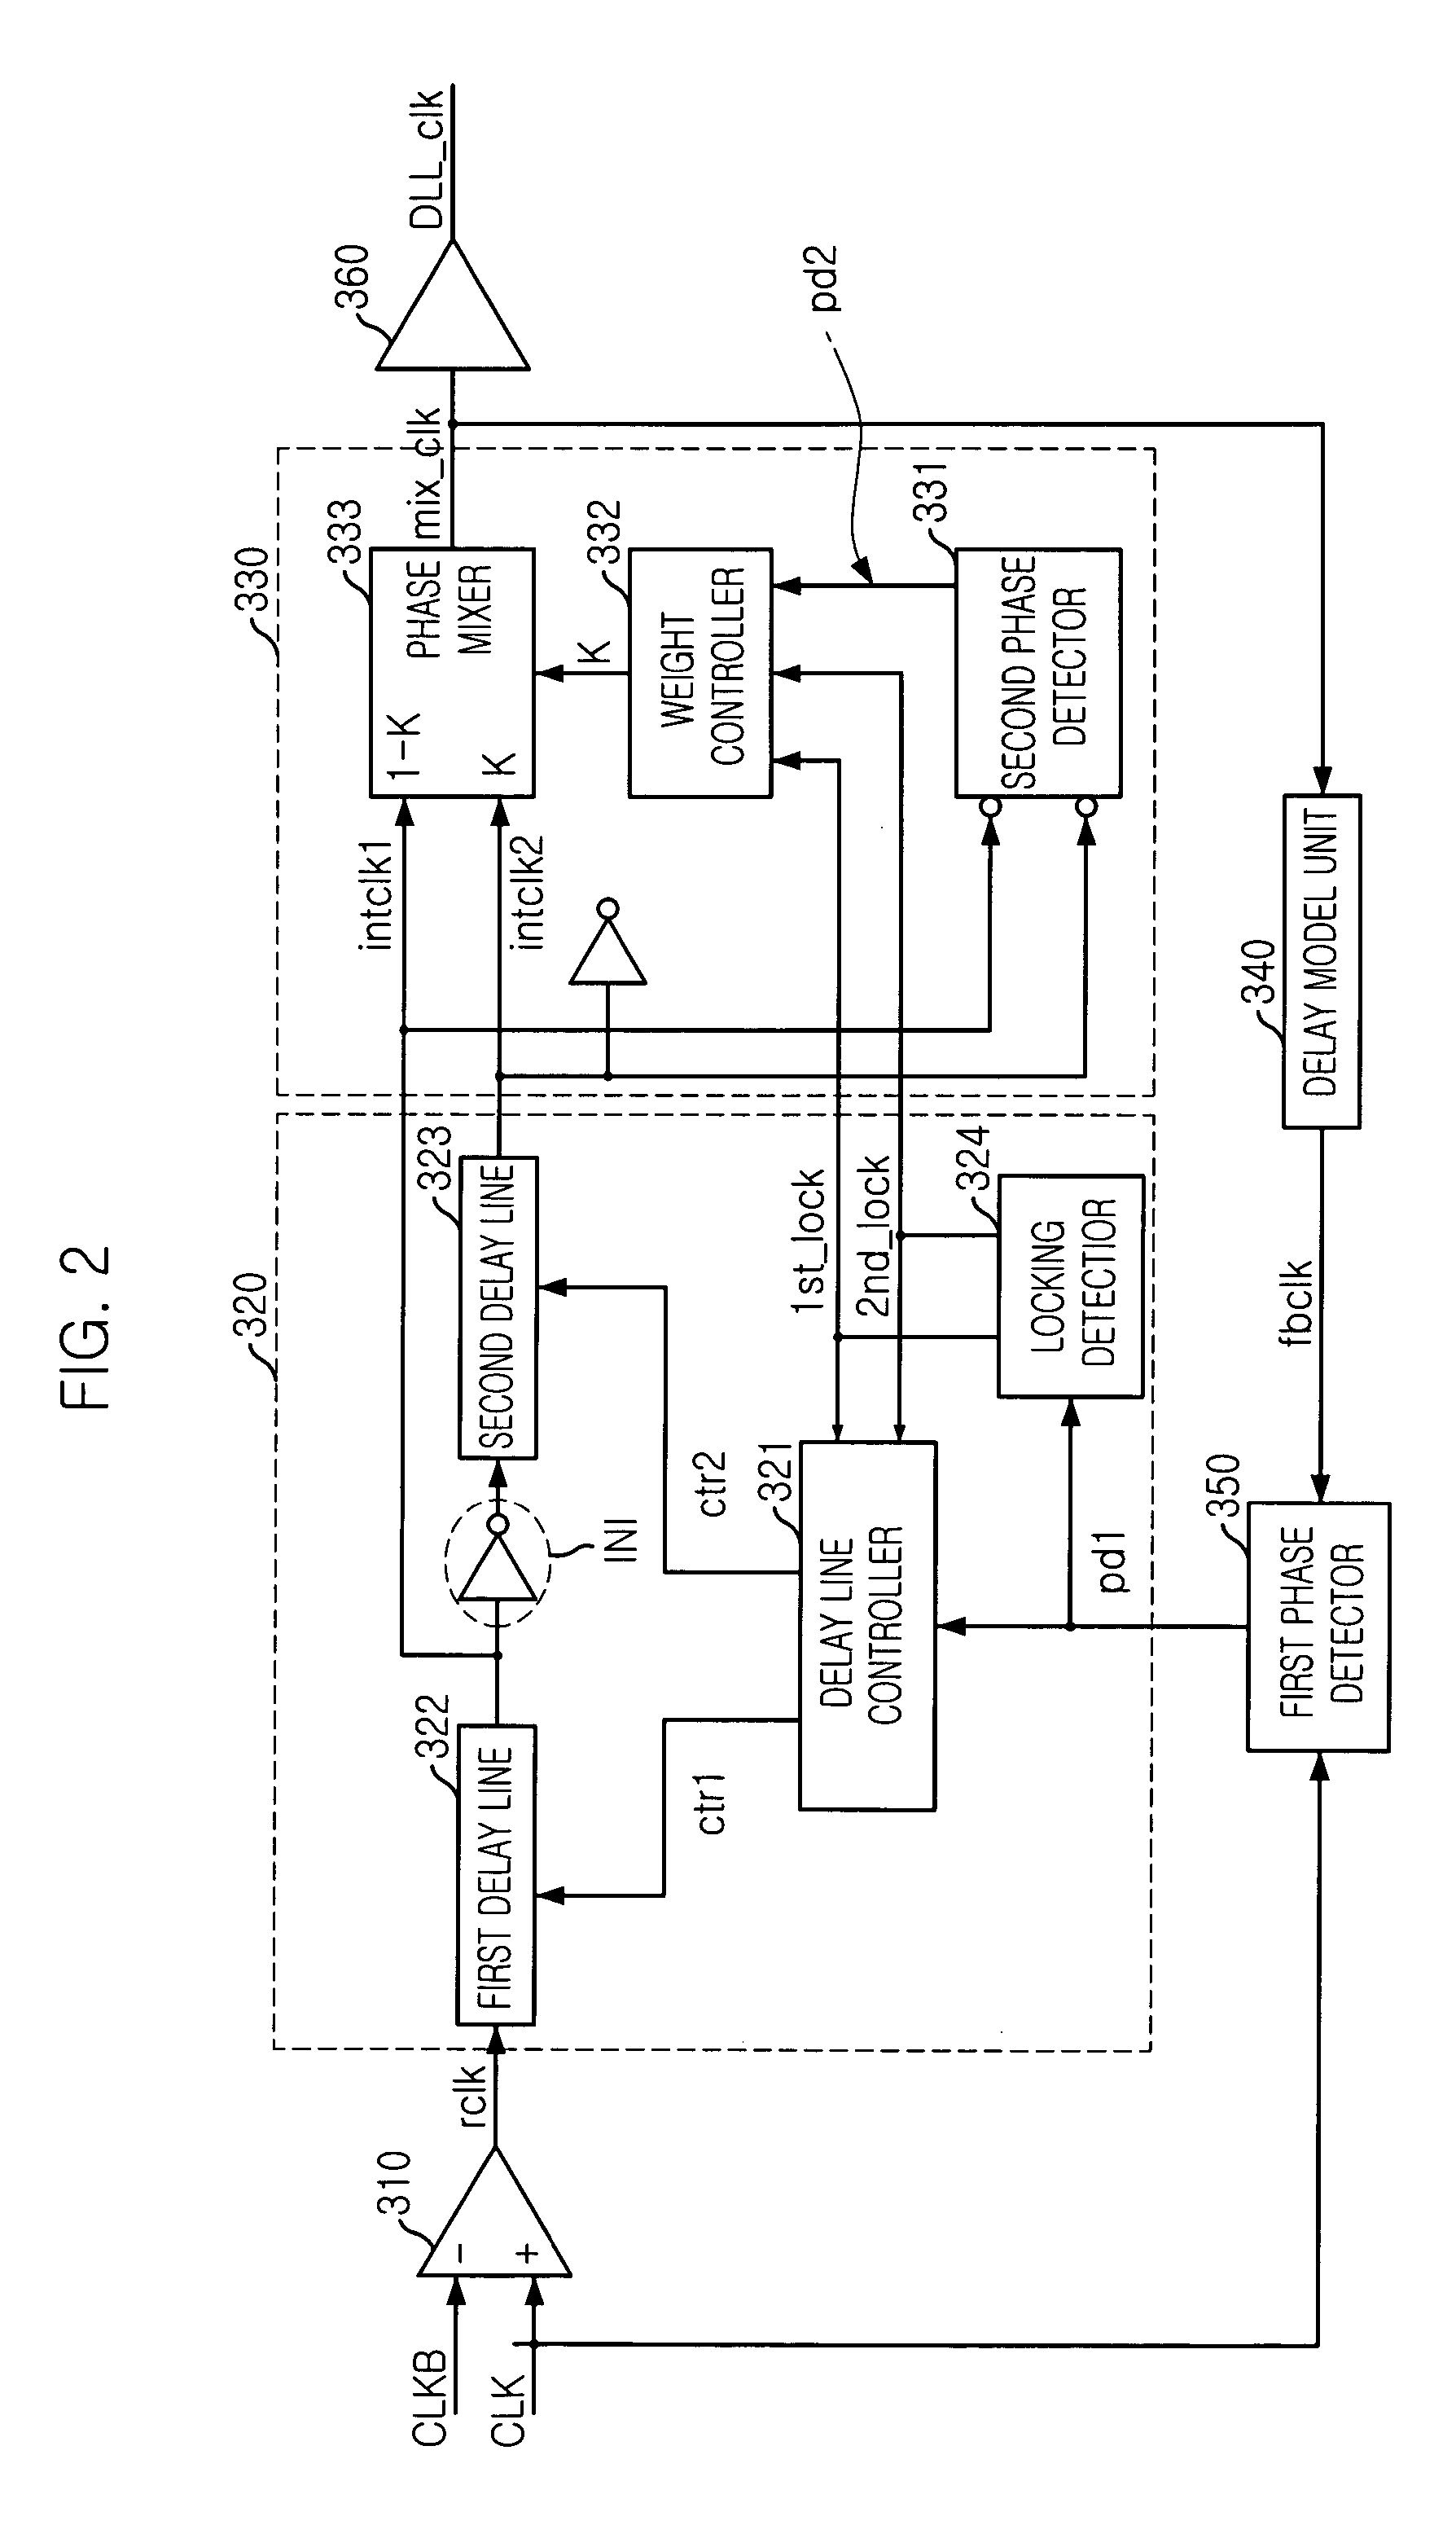 Delay locked loop and its control method for correcting a duty ratio of a clock signal